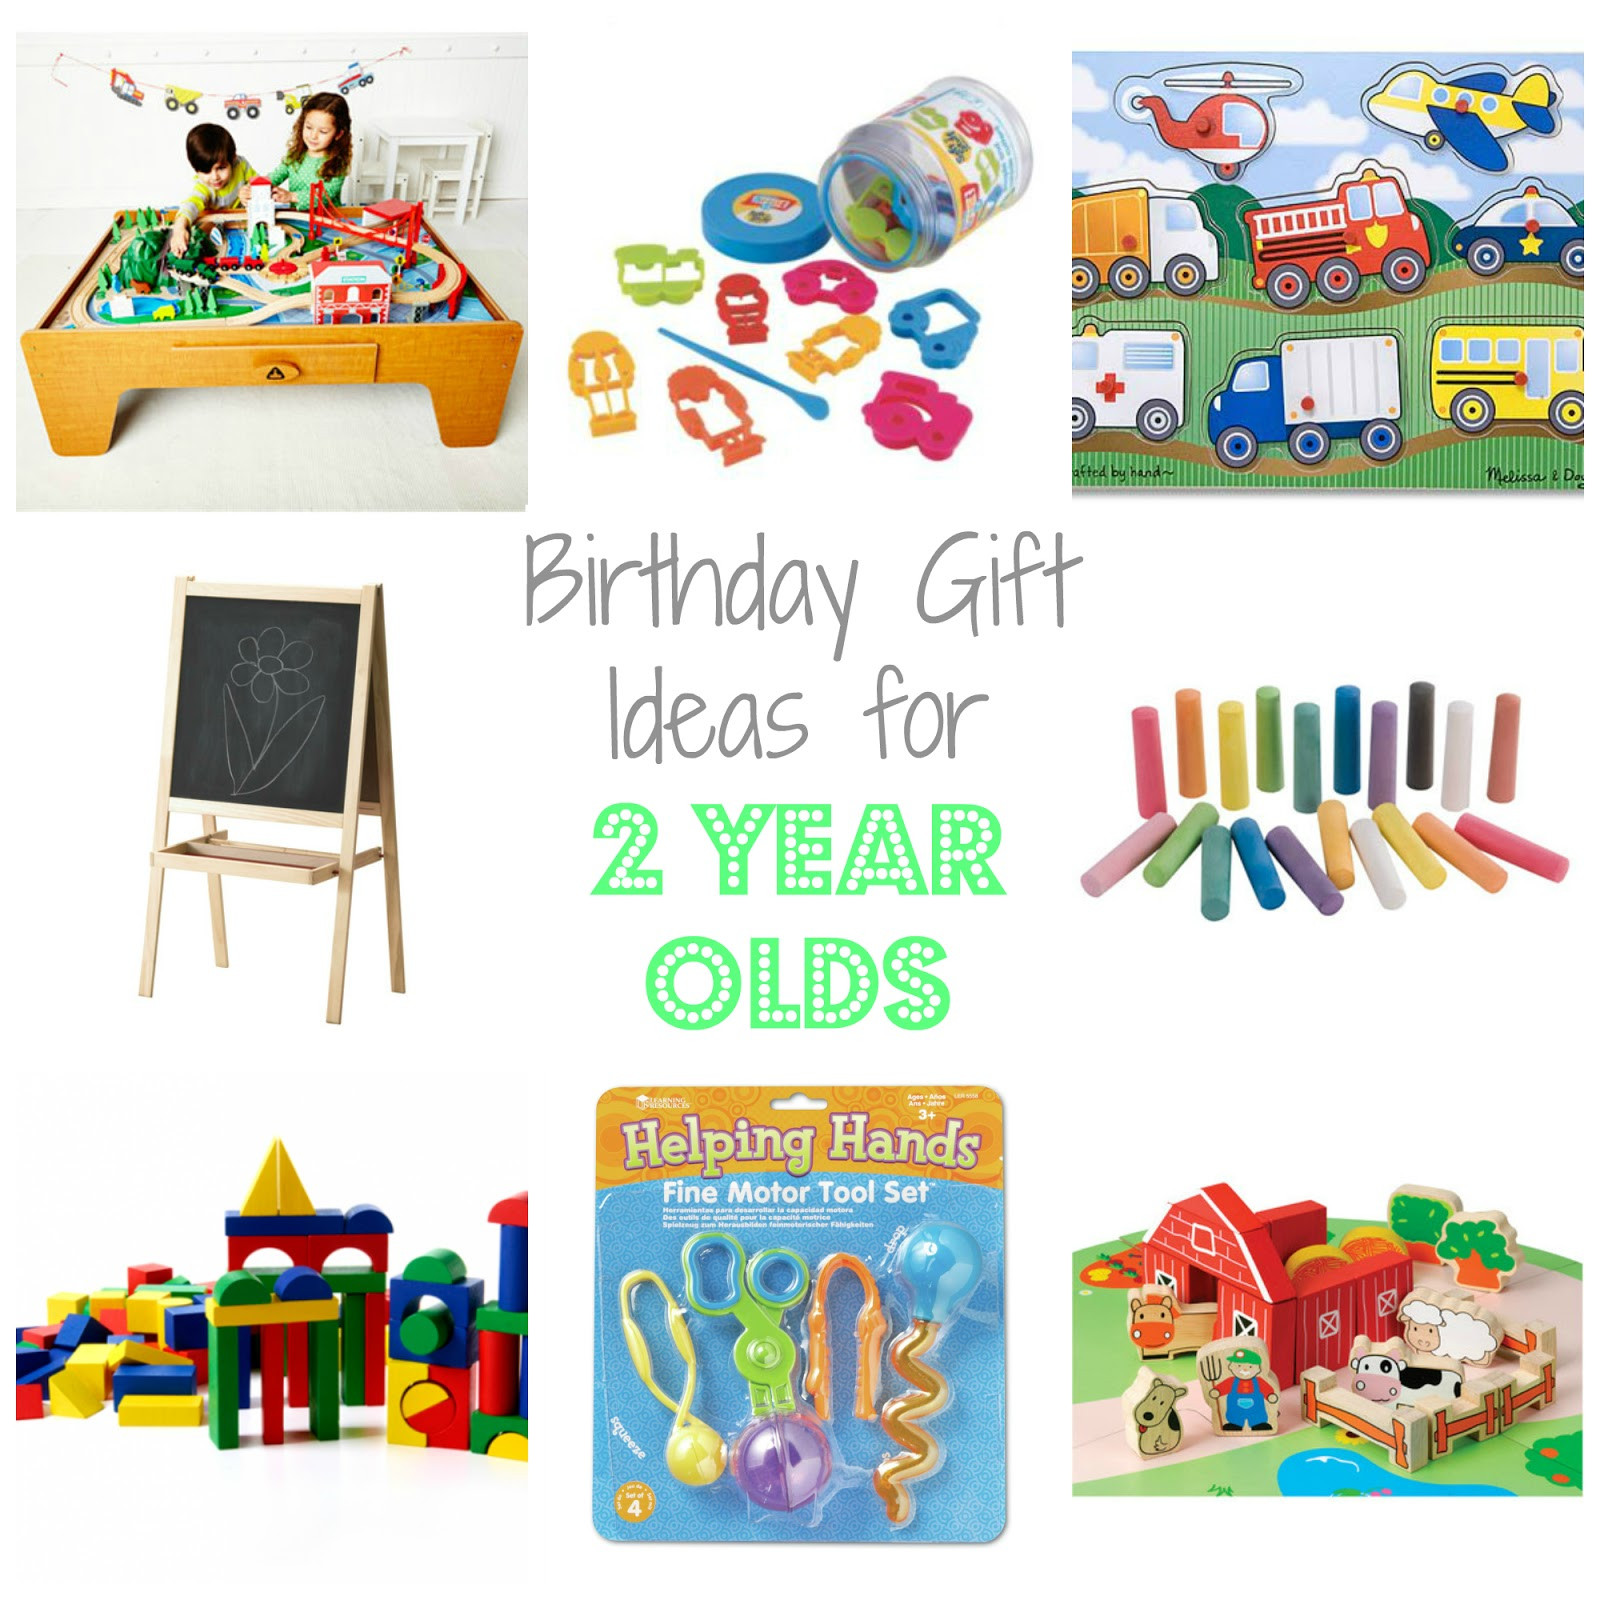 2 Year Old Birthday Gift Ideas
 Birthday Gift Ideas for Two Year Olds